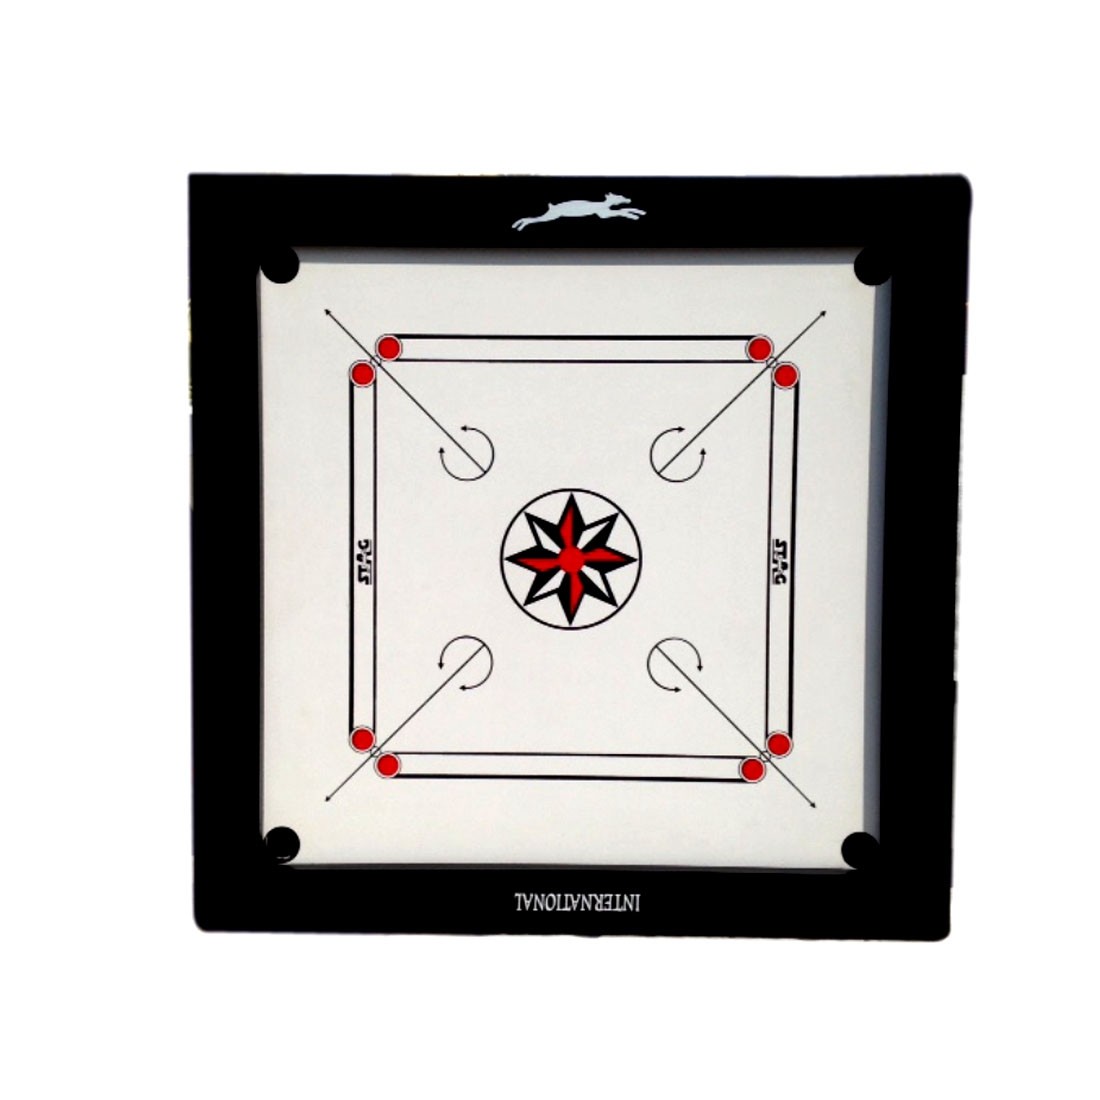 STAG CARROM BOARD INT. 4" BORDER 12MM Prelaminated Particle Board WITH LOW STAND